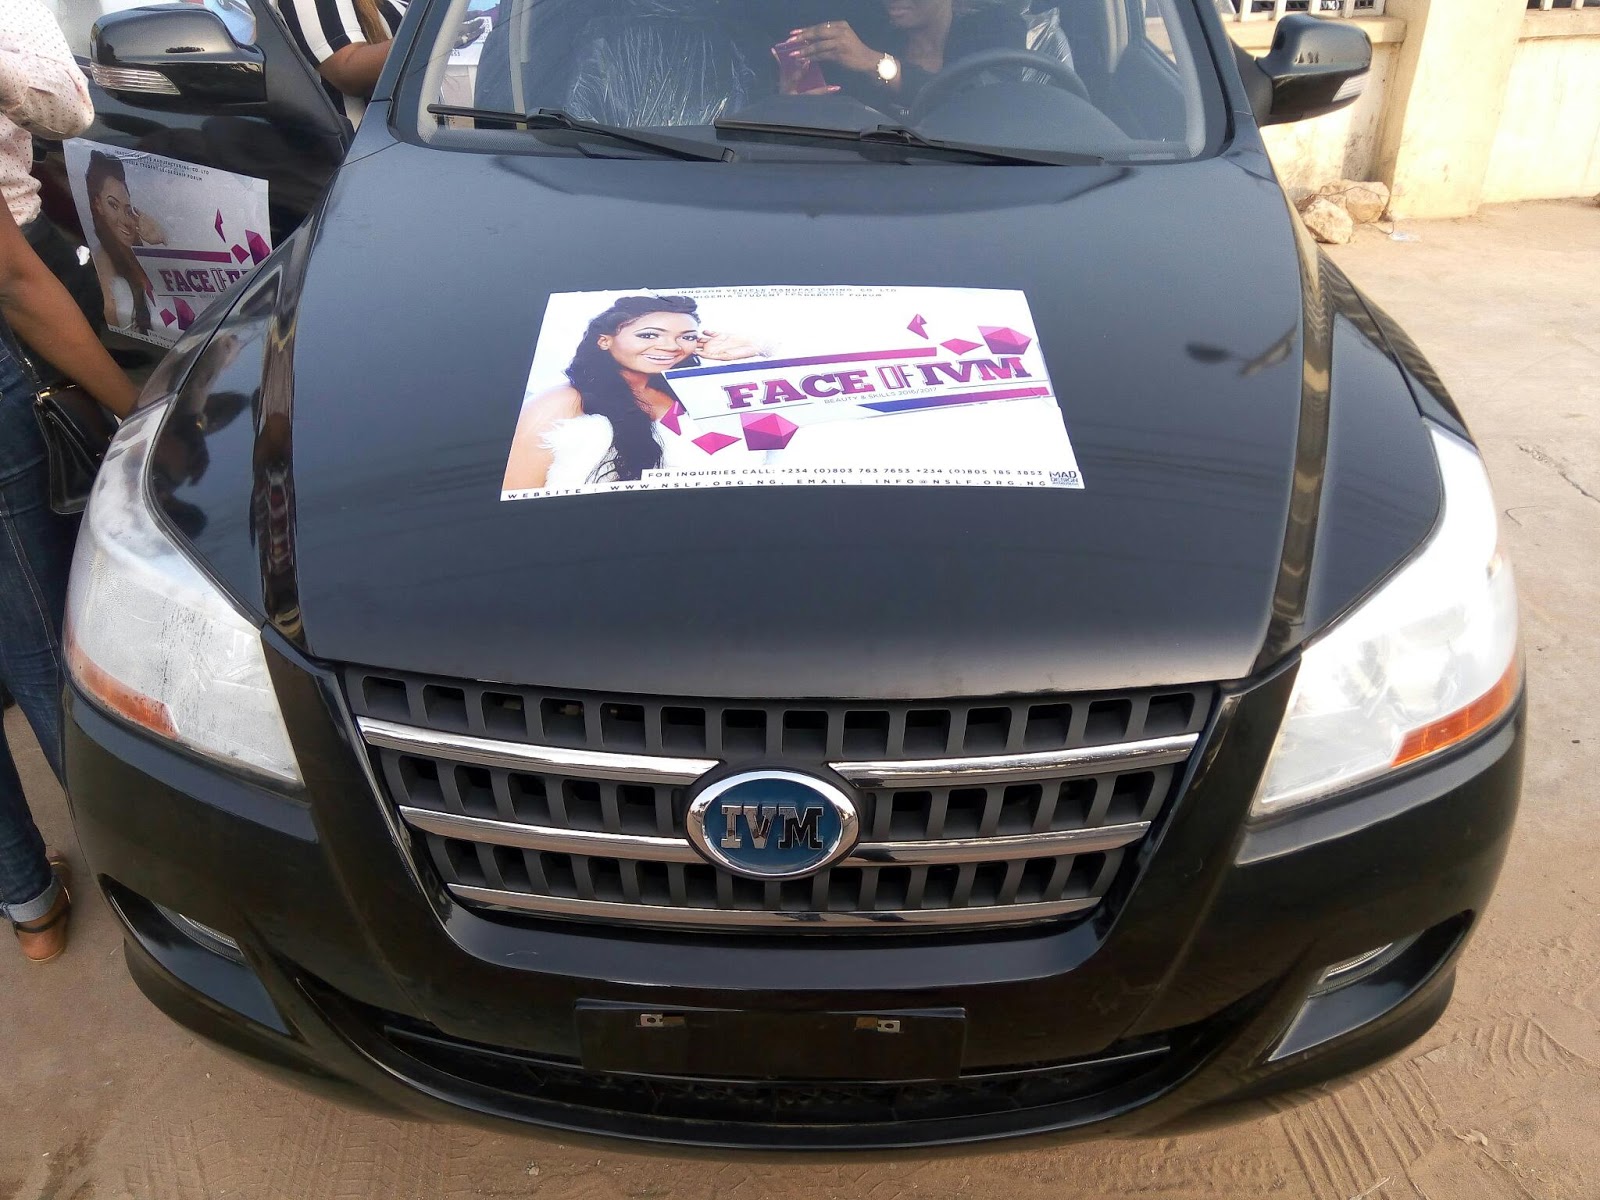 PRESS RELEASE: Innoson Motors Withdraws Endorsement From Face Of IVM Beauty and Skill Project